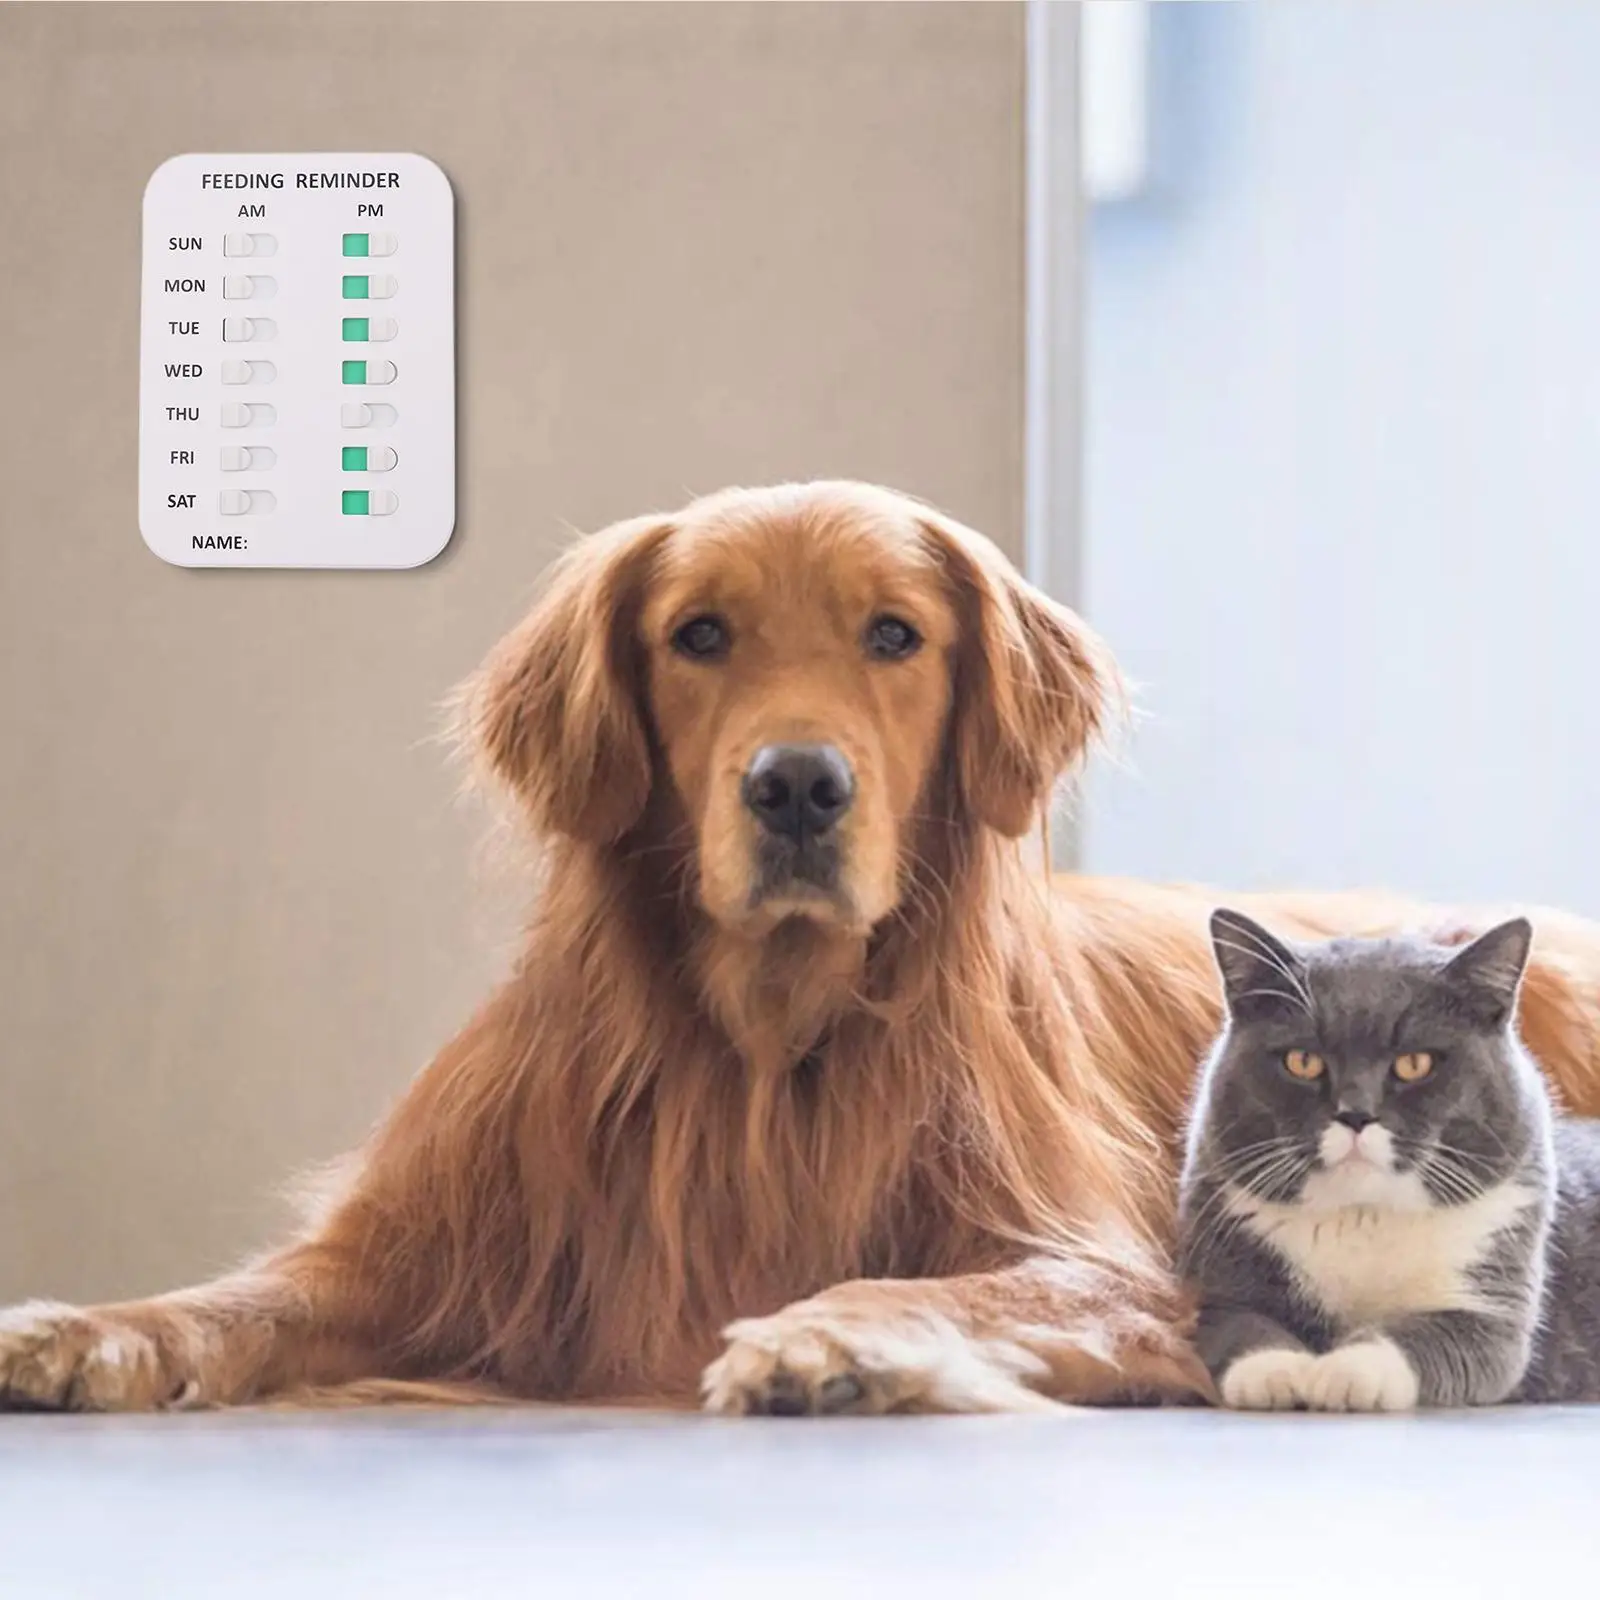 Dog Feeding Reminder Magnetic Reminder Sticker, Daily Indication Chart Feed Your Cat, Overfeeding or Obesity